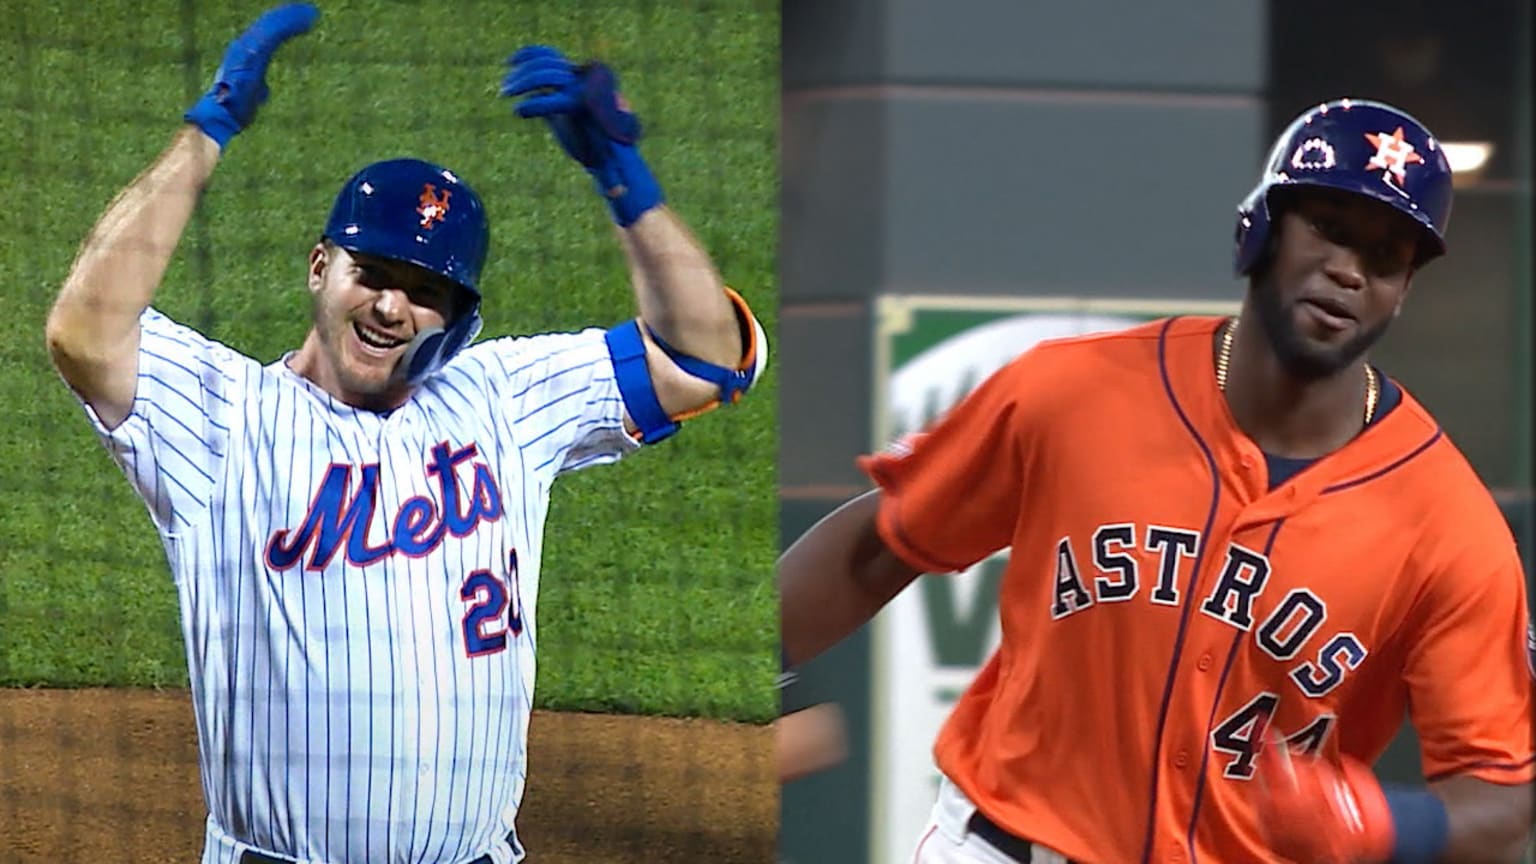 Mets' Alonso, Astros' Alvarez named Rookies of the Year - Los